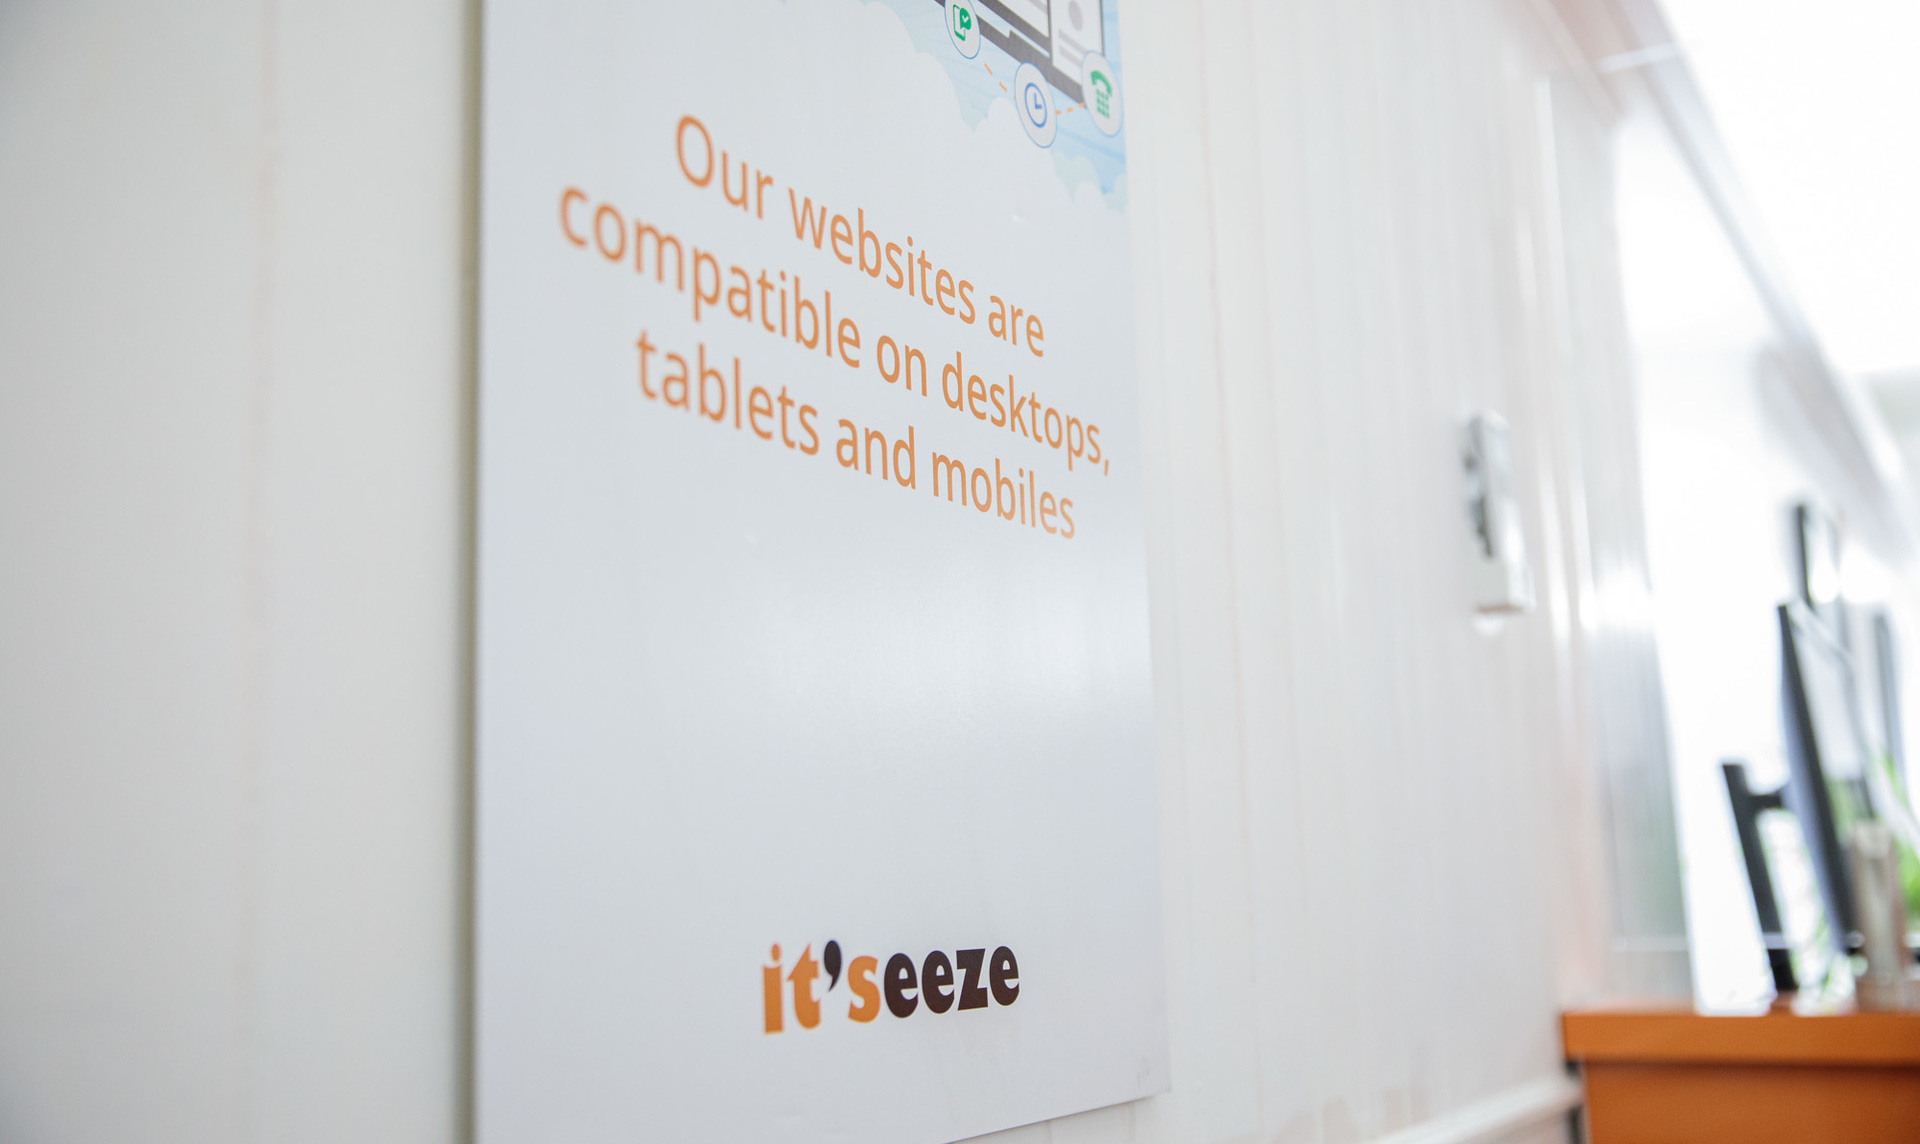 A poster explaining our websites are fully responsive